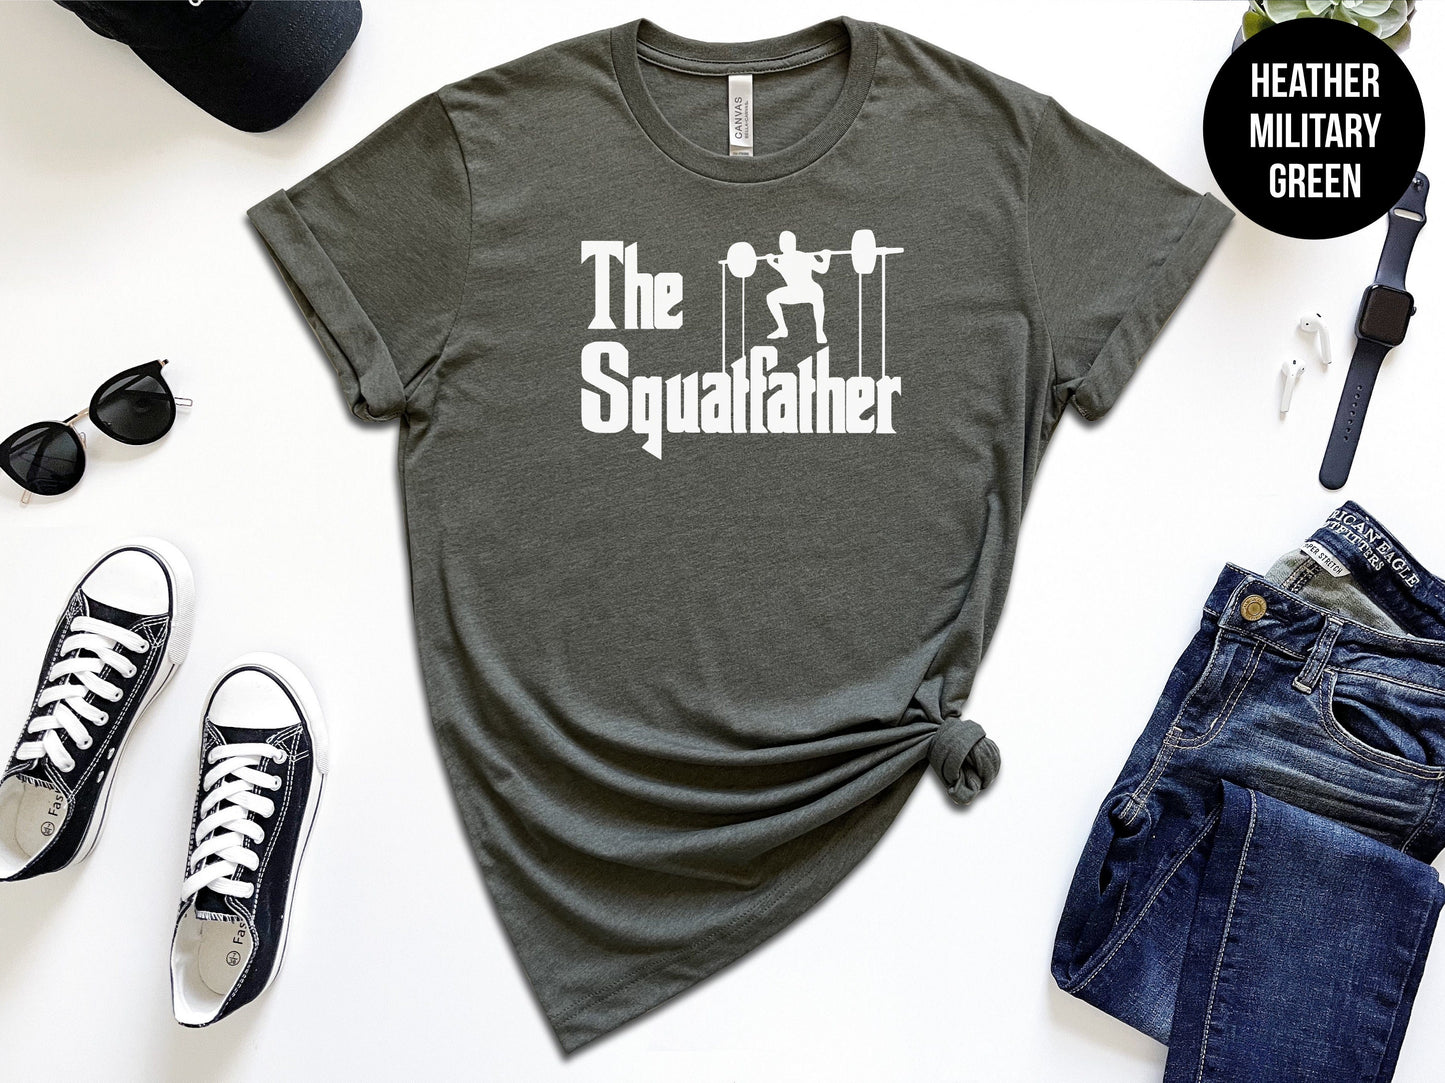 The Squatfather